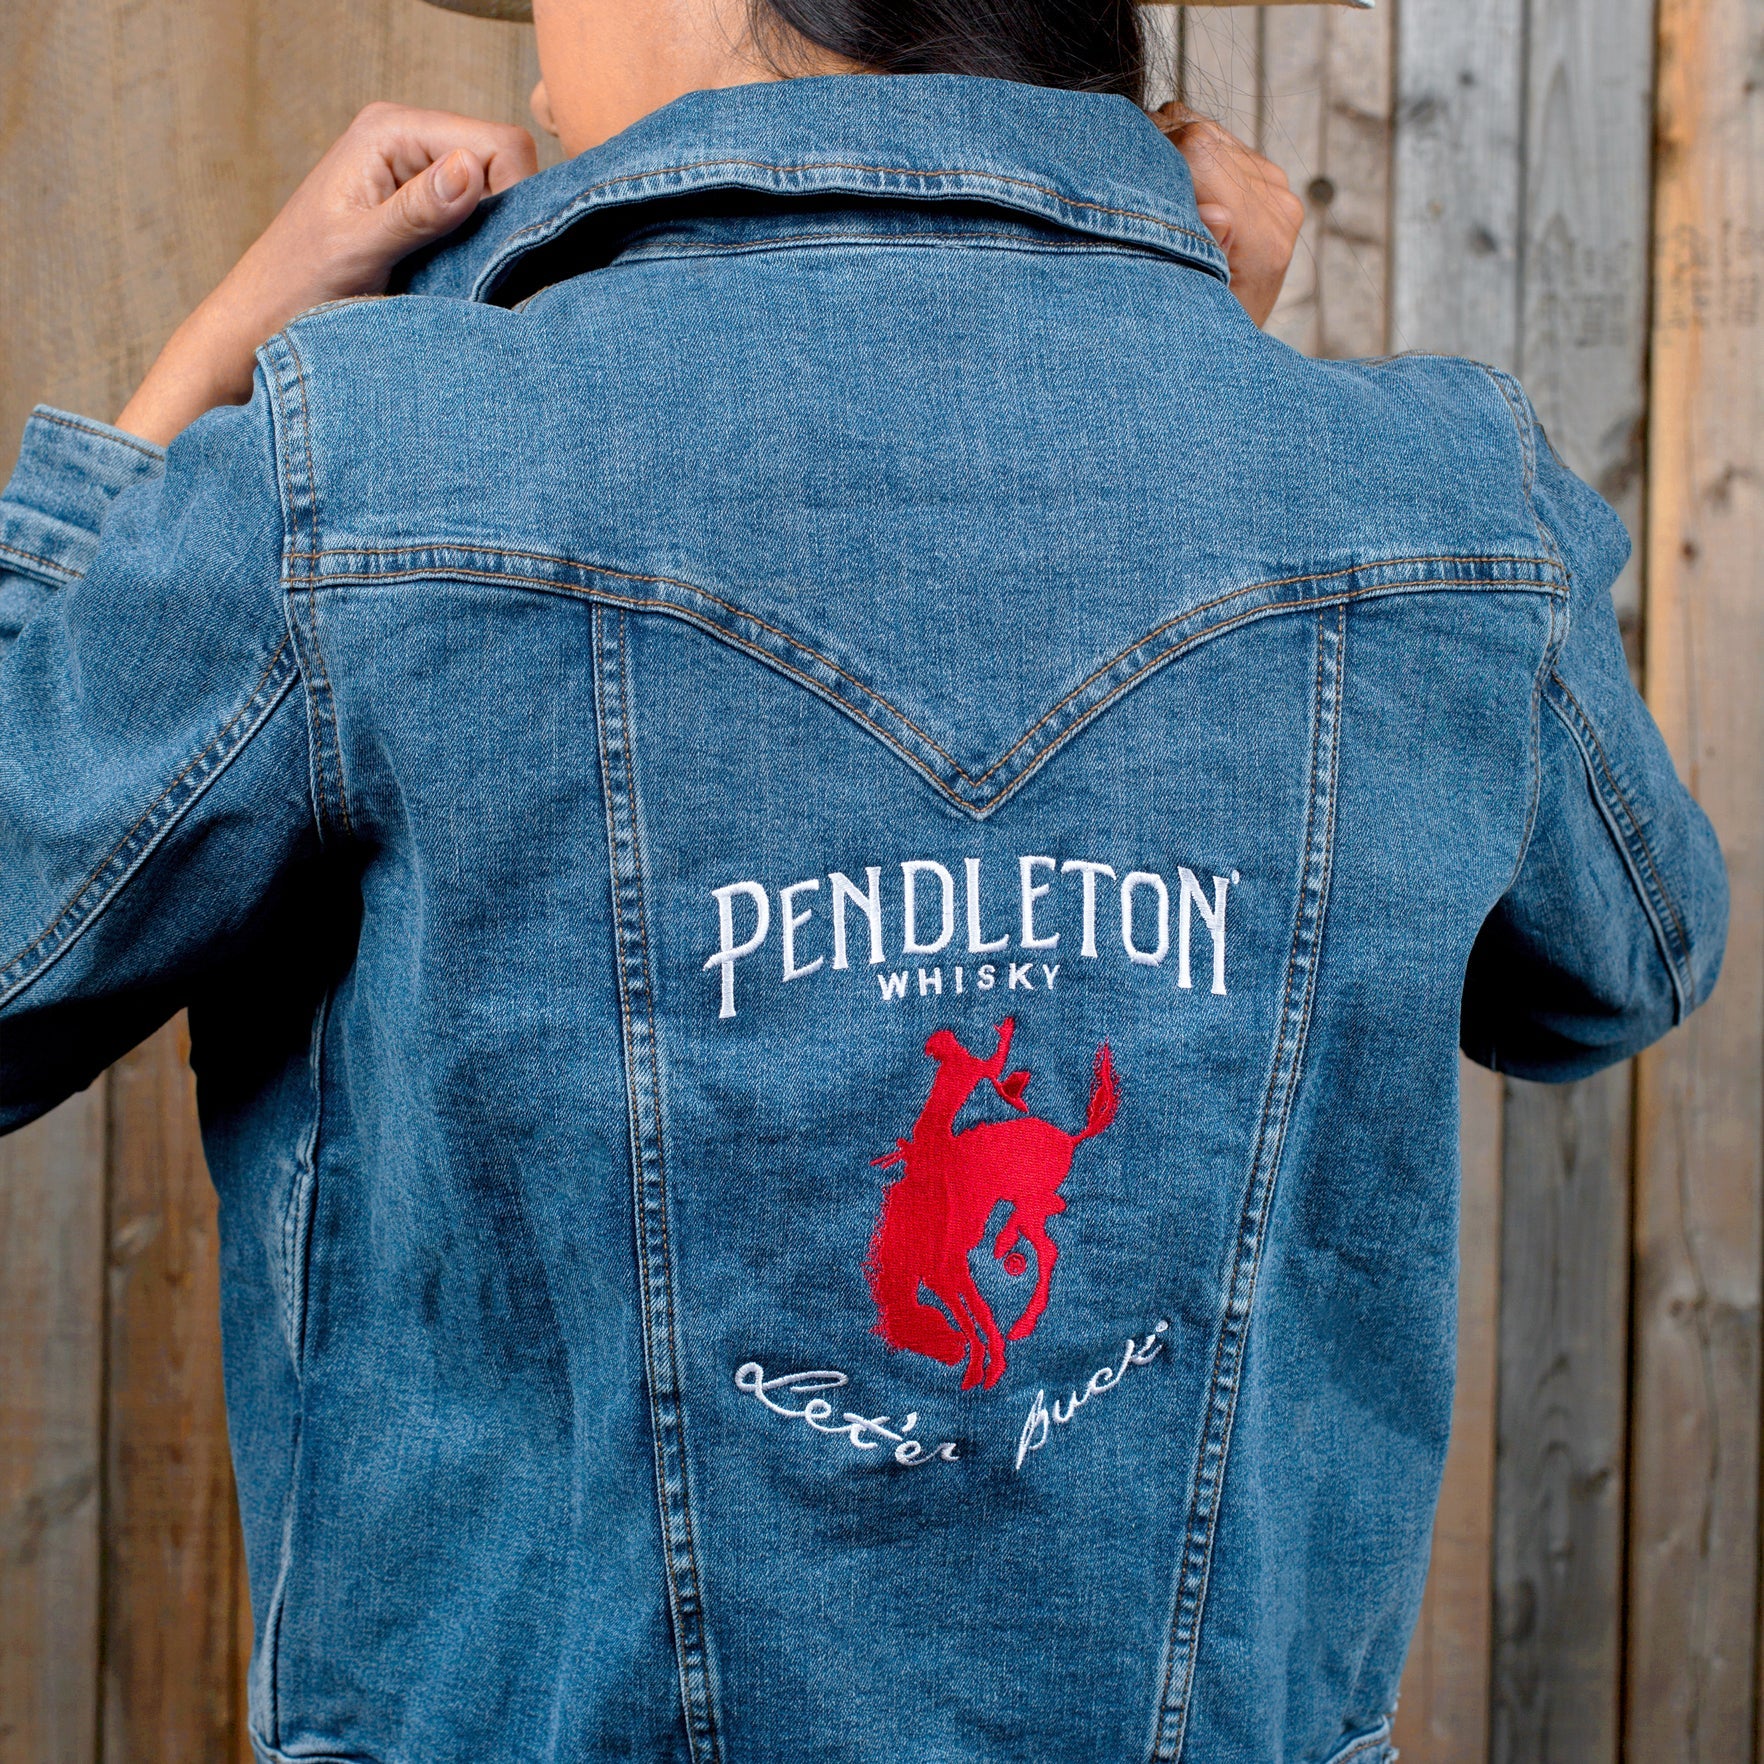 Back view of a woman wearing a Wrangler Denim Jacket with the Pendleton®️ Whisky logo embroidered on the pack panel 